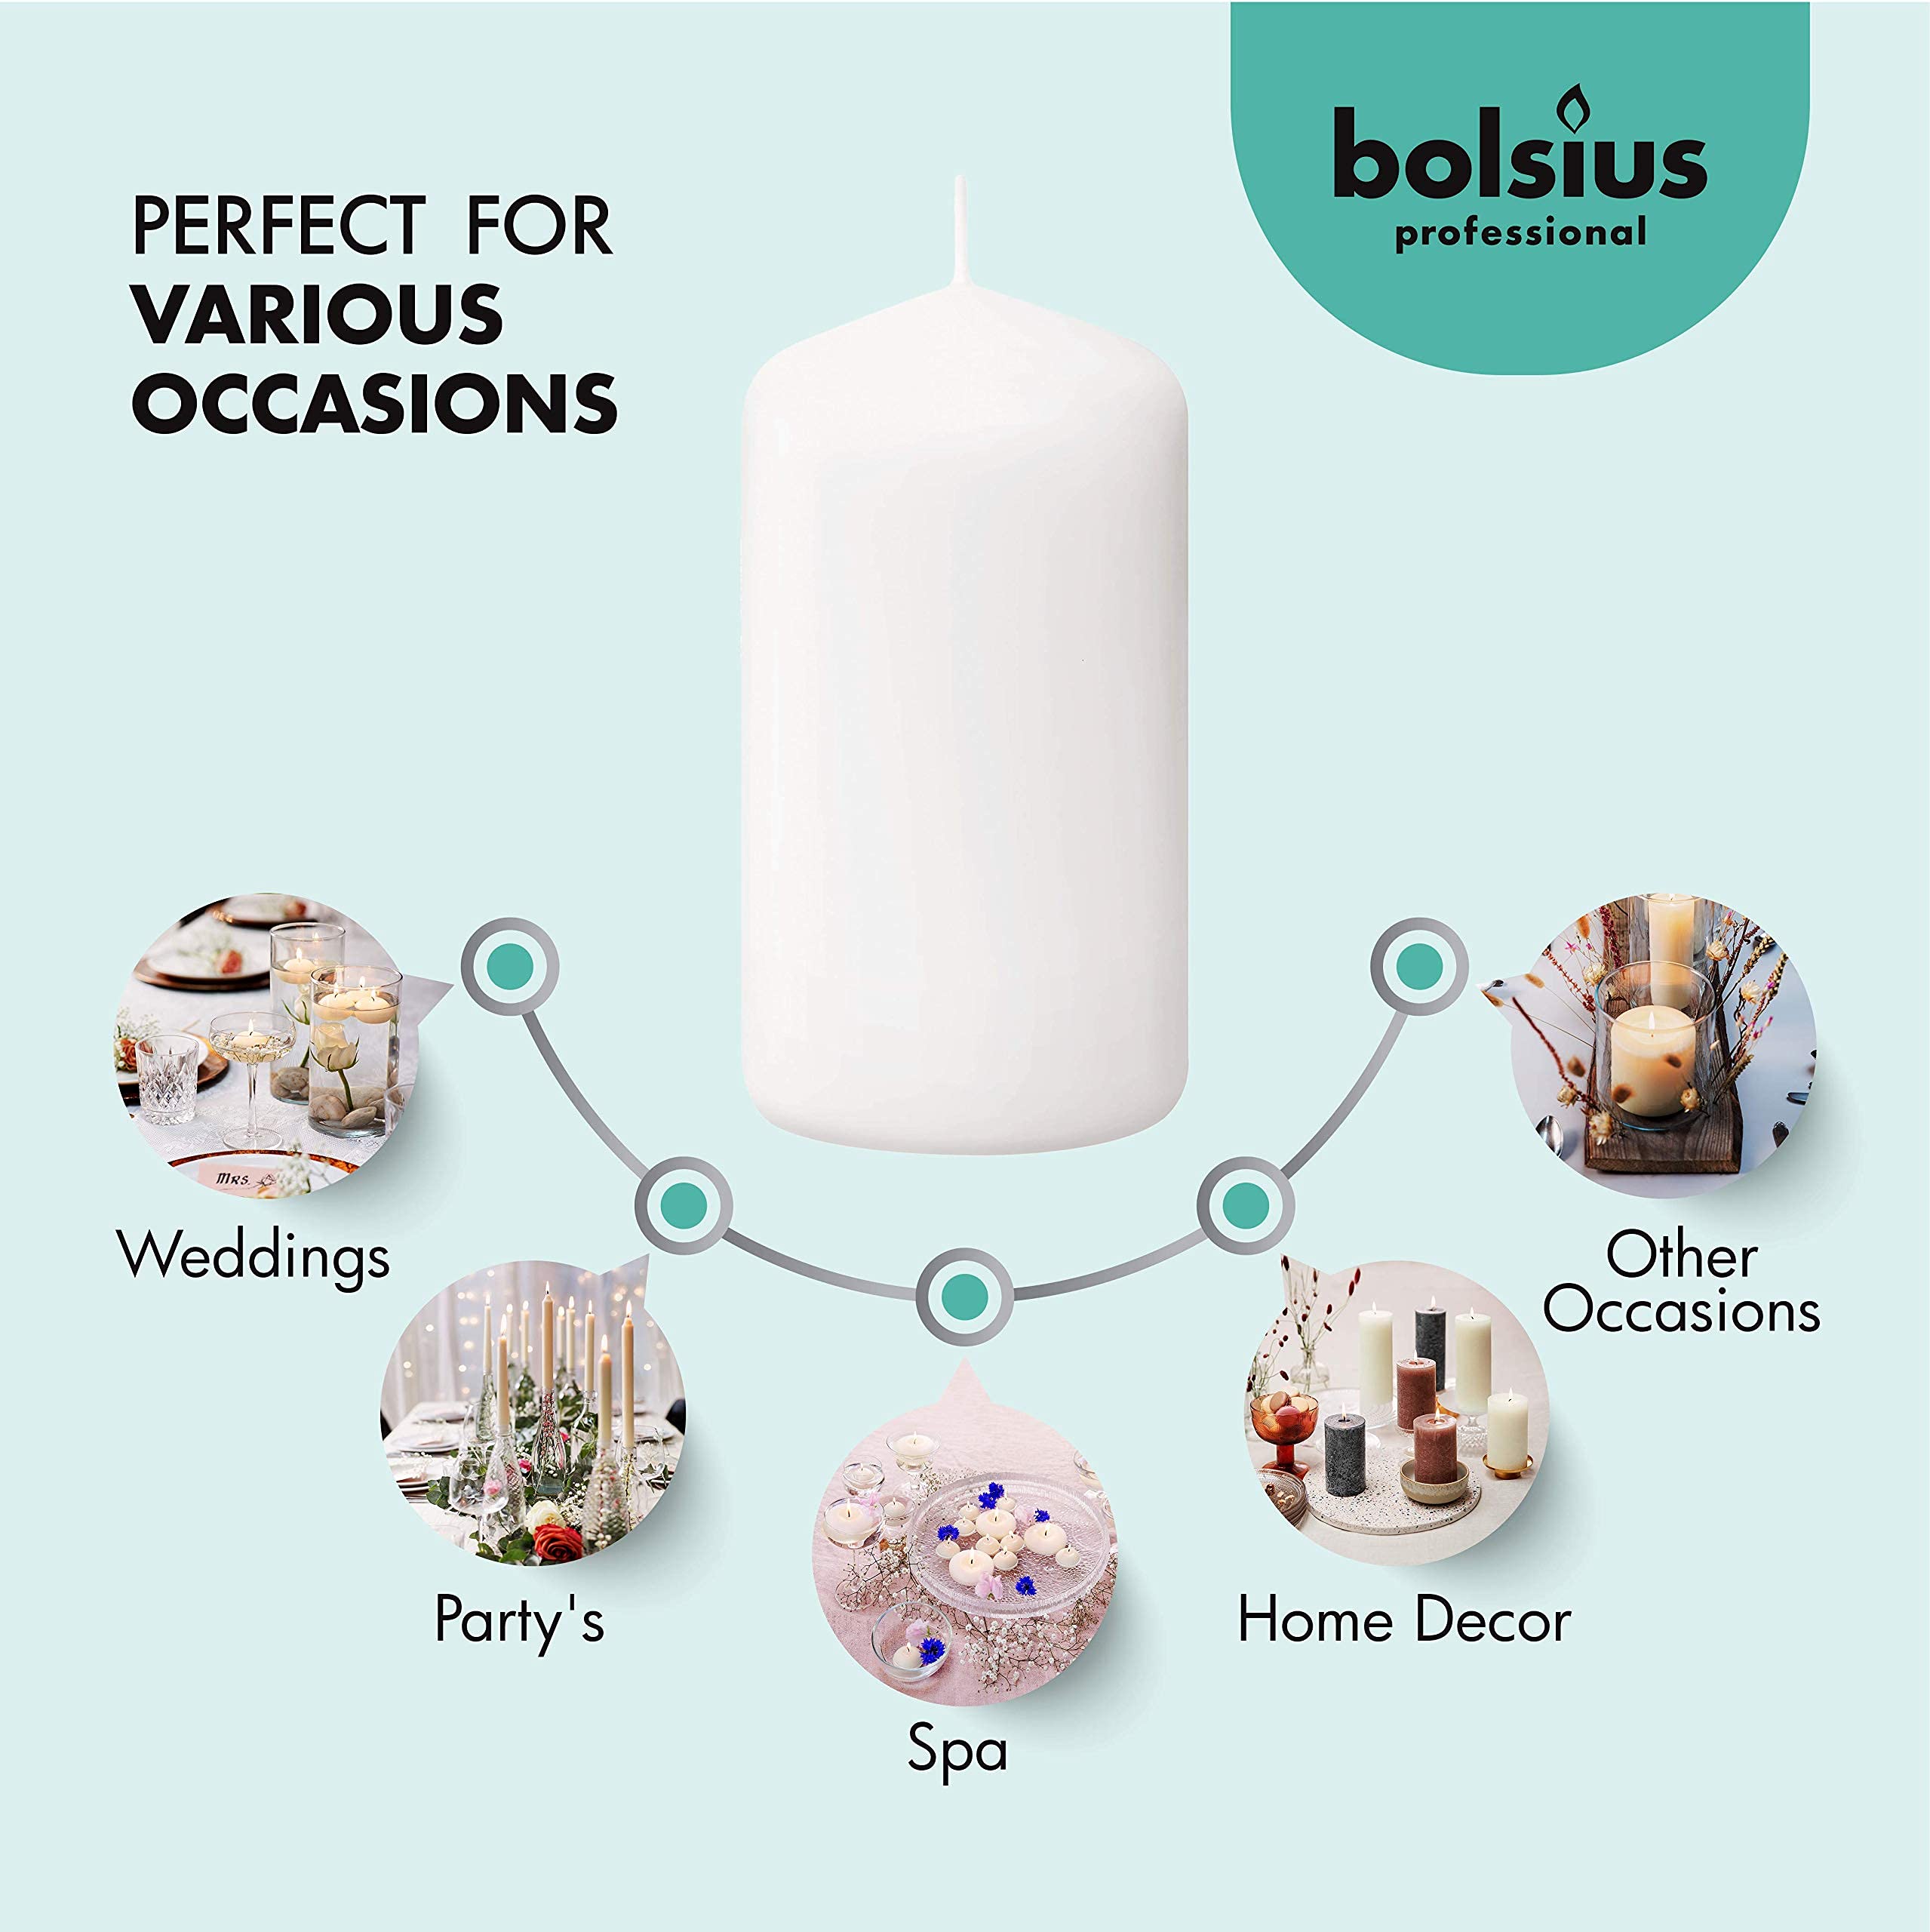 Bolsius White Pillar Candles – Unscented Candle Set of 20 – Dripless, Smokeless, and Clean Burning Household Dinner Candles – Perfect for Weddings, Parties, Dinners – 20 Decorative Candles  - Like New